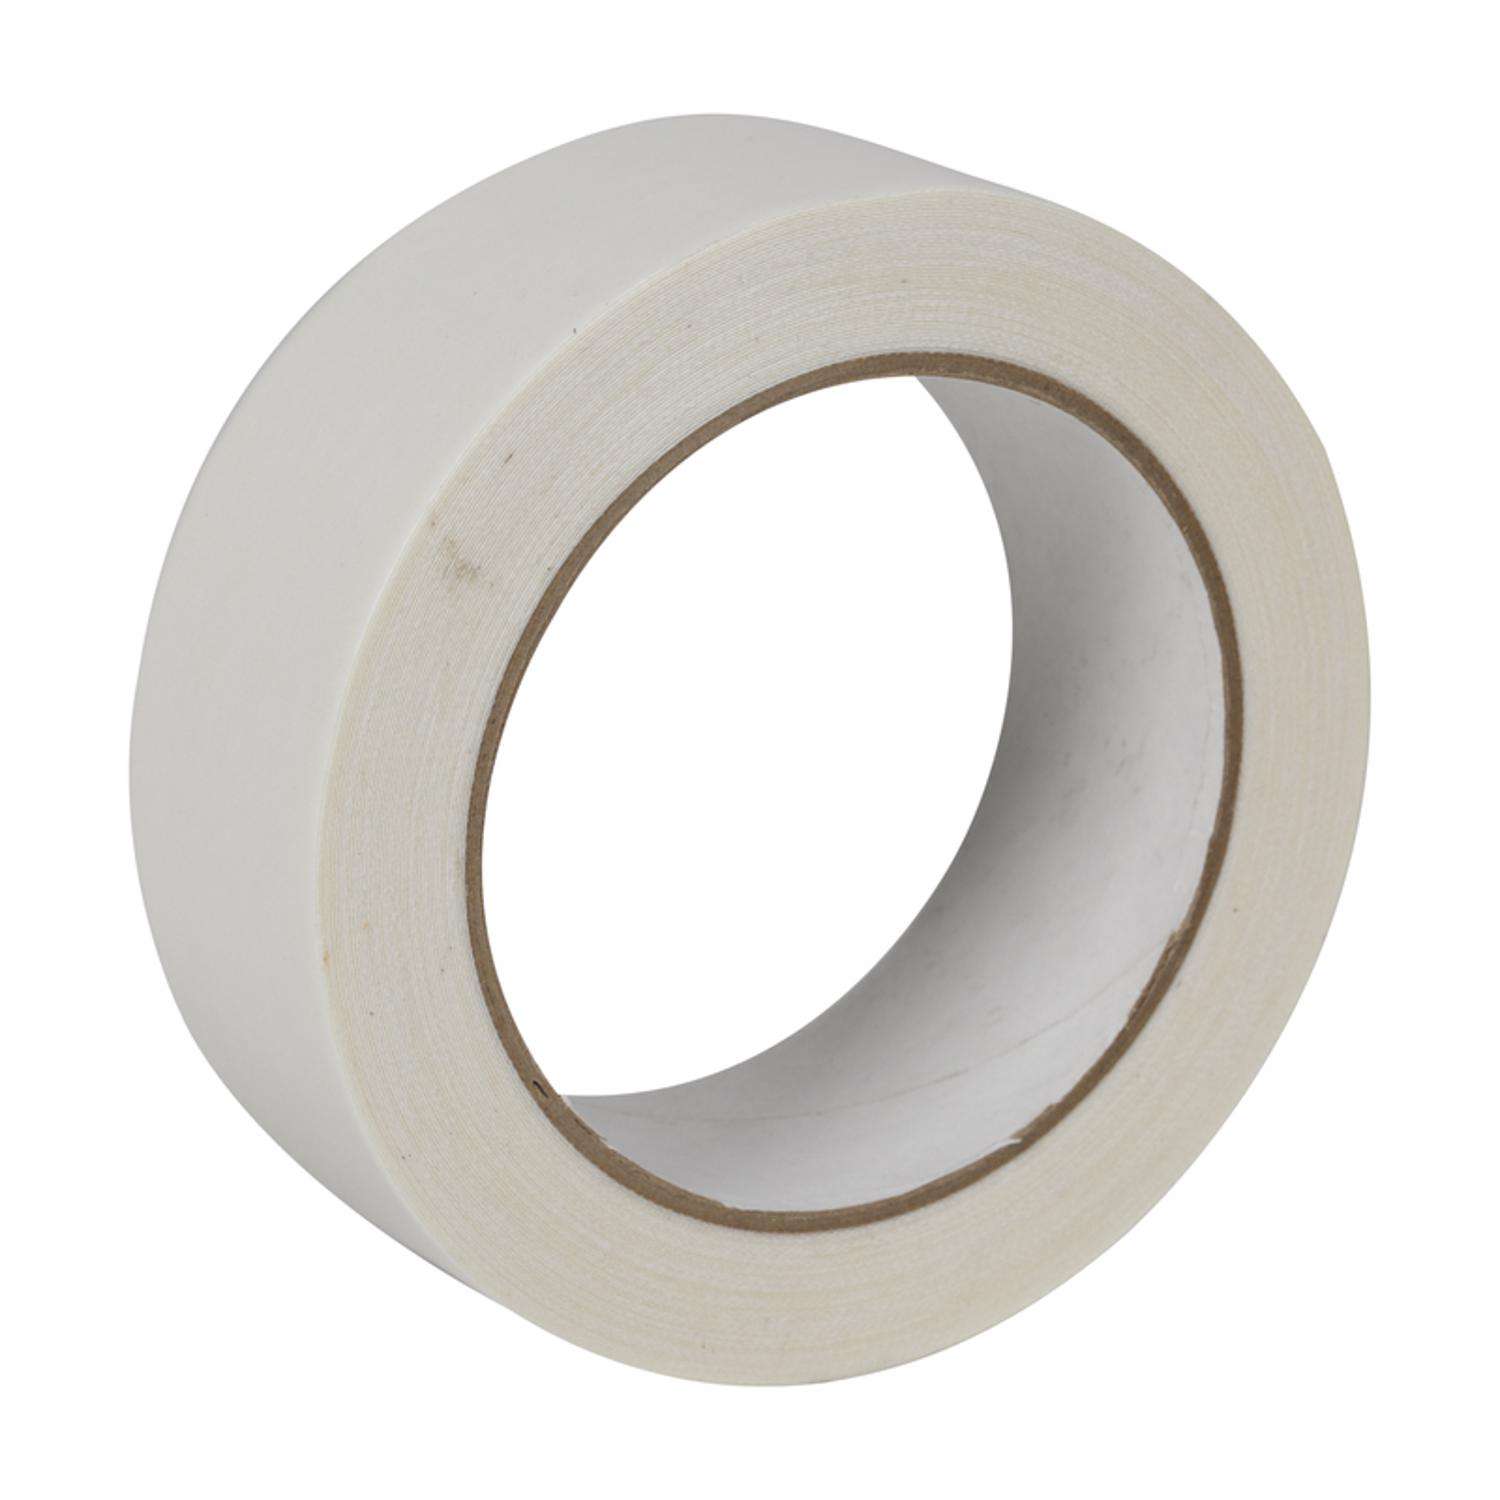 Heavy Duty Double-Sided Tape for Fabric - Anti-Skid Carpet Tape